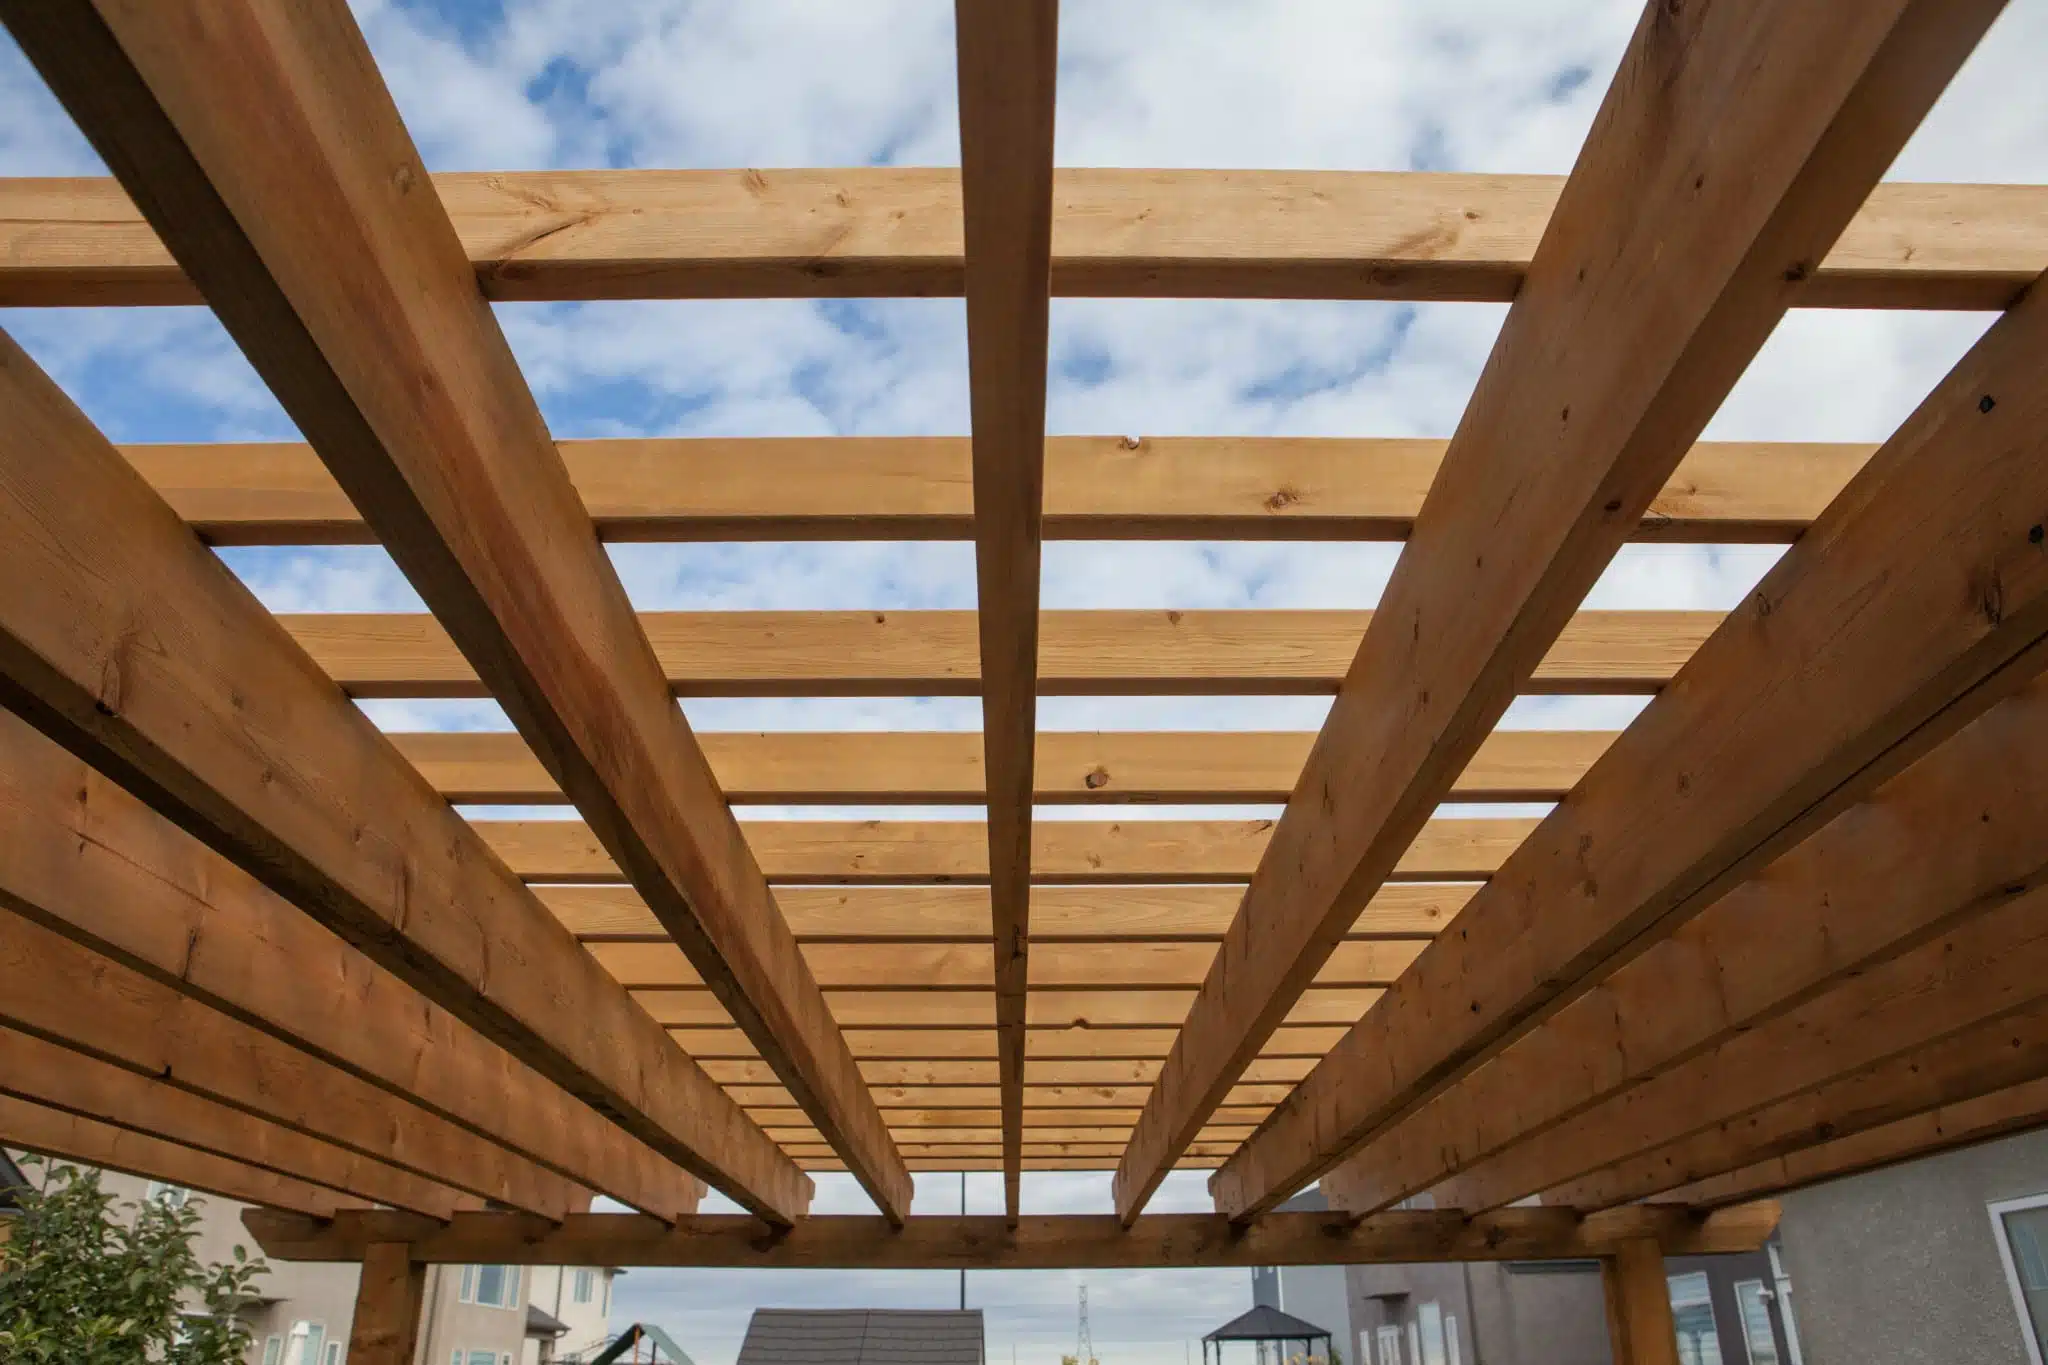 Looking up at a wooden pergola with the blue sky and white clouds in the background